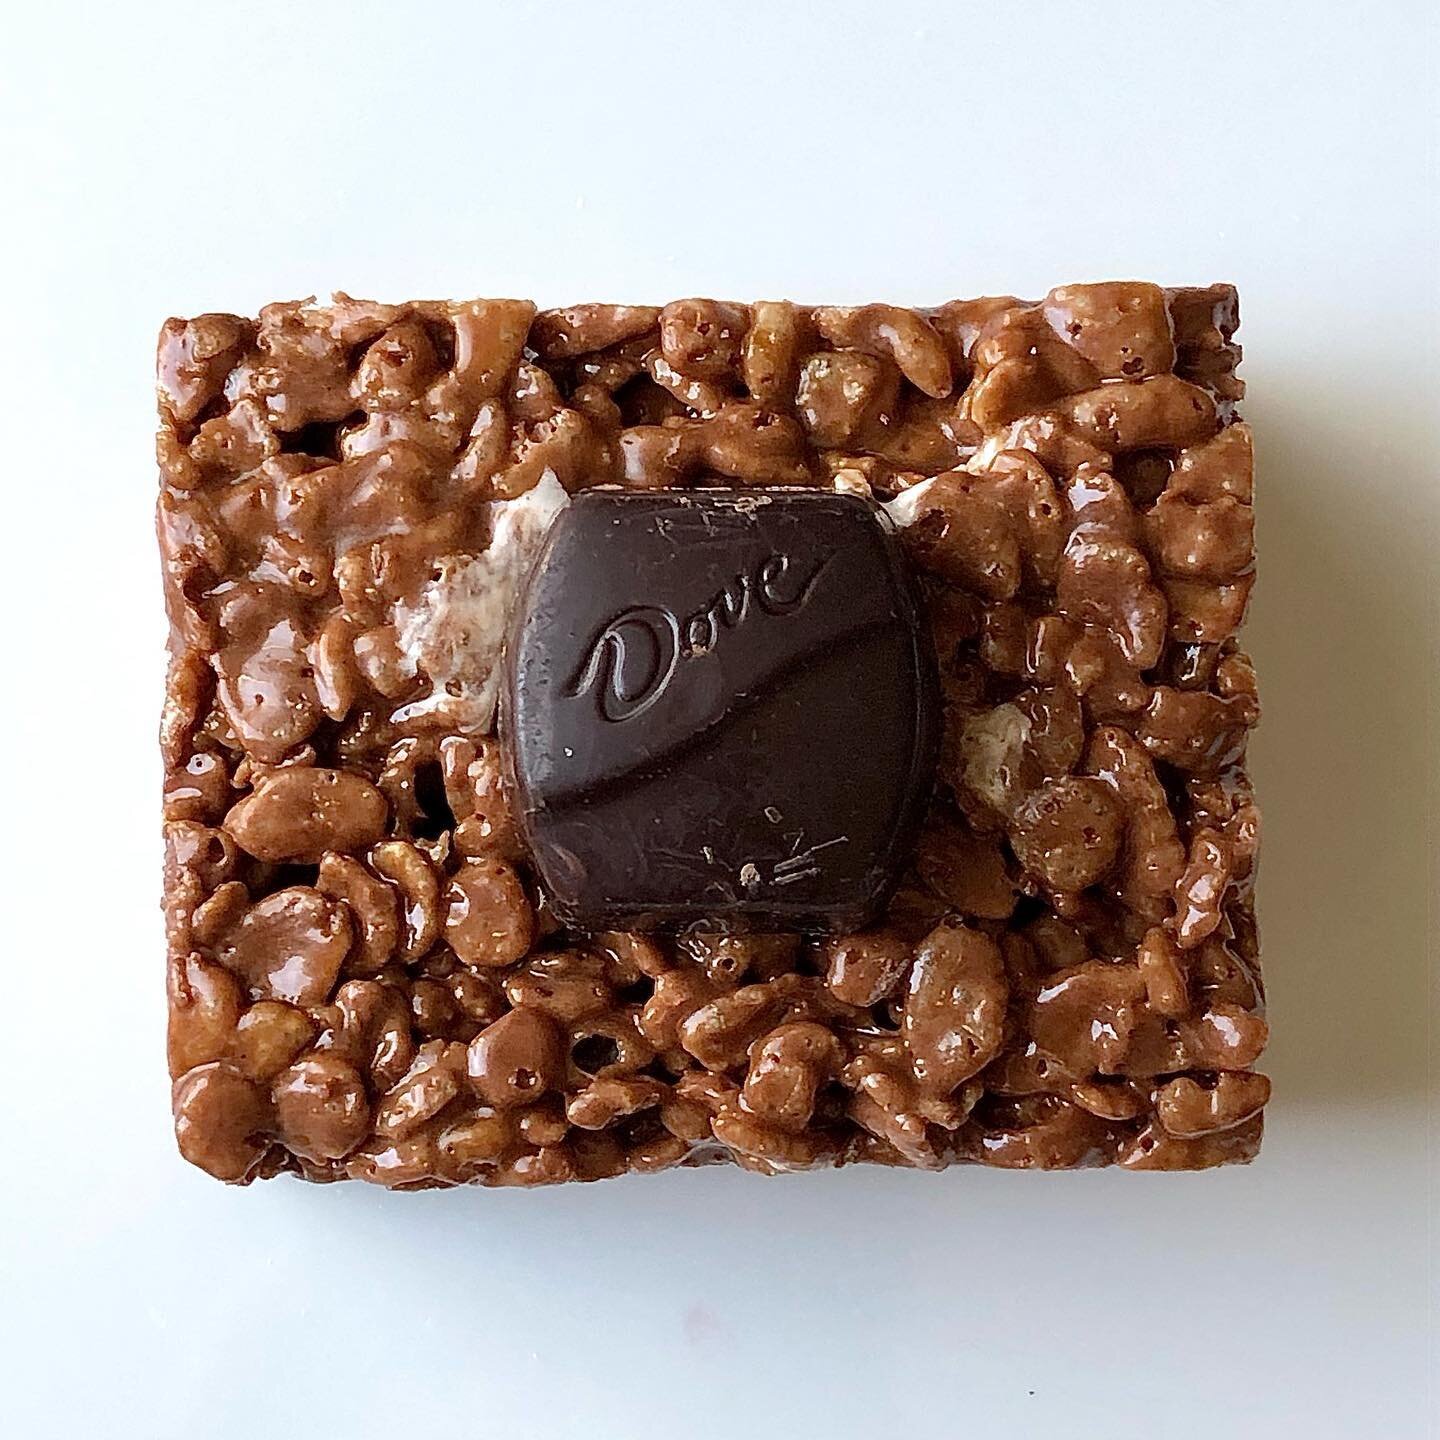 DARK CHOCOLATE SALTED CARAMEL RICE CRISPIE TREAT &mdash;  MAY Featured Flavor # 2

A decadent sweet, salty, gooey and crunchy treat for any celebration! 

-dark chocolate cocoa flavored rice crispie treat base 
-handcrafted salted caramel swirls
-ext